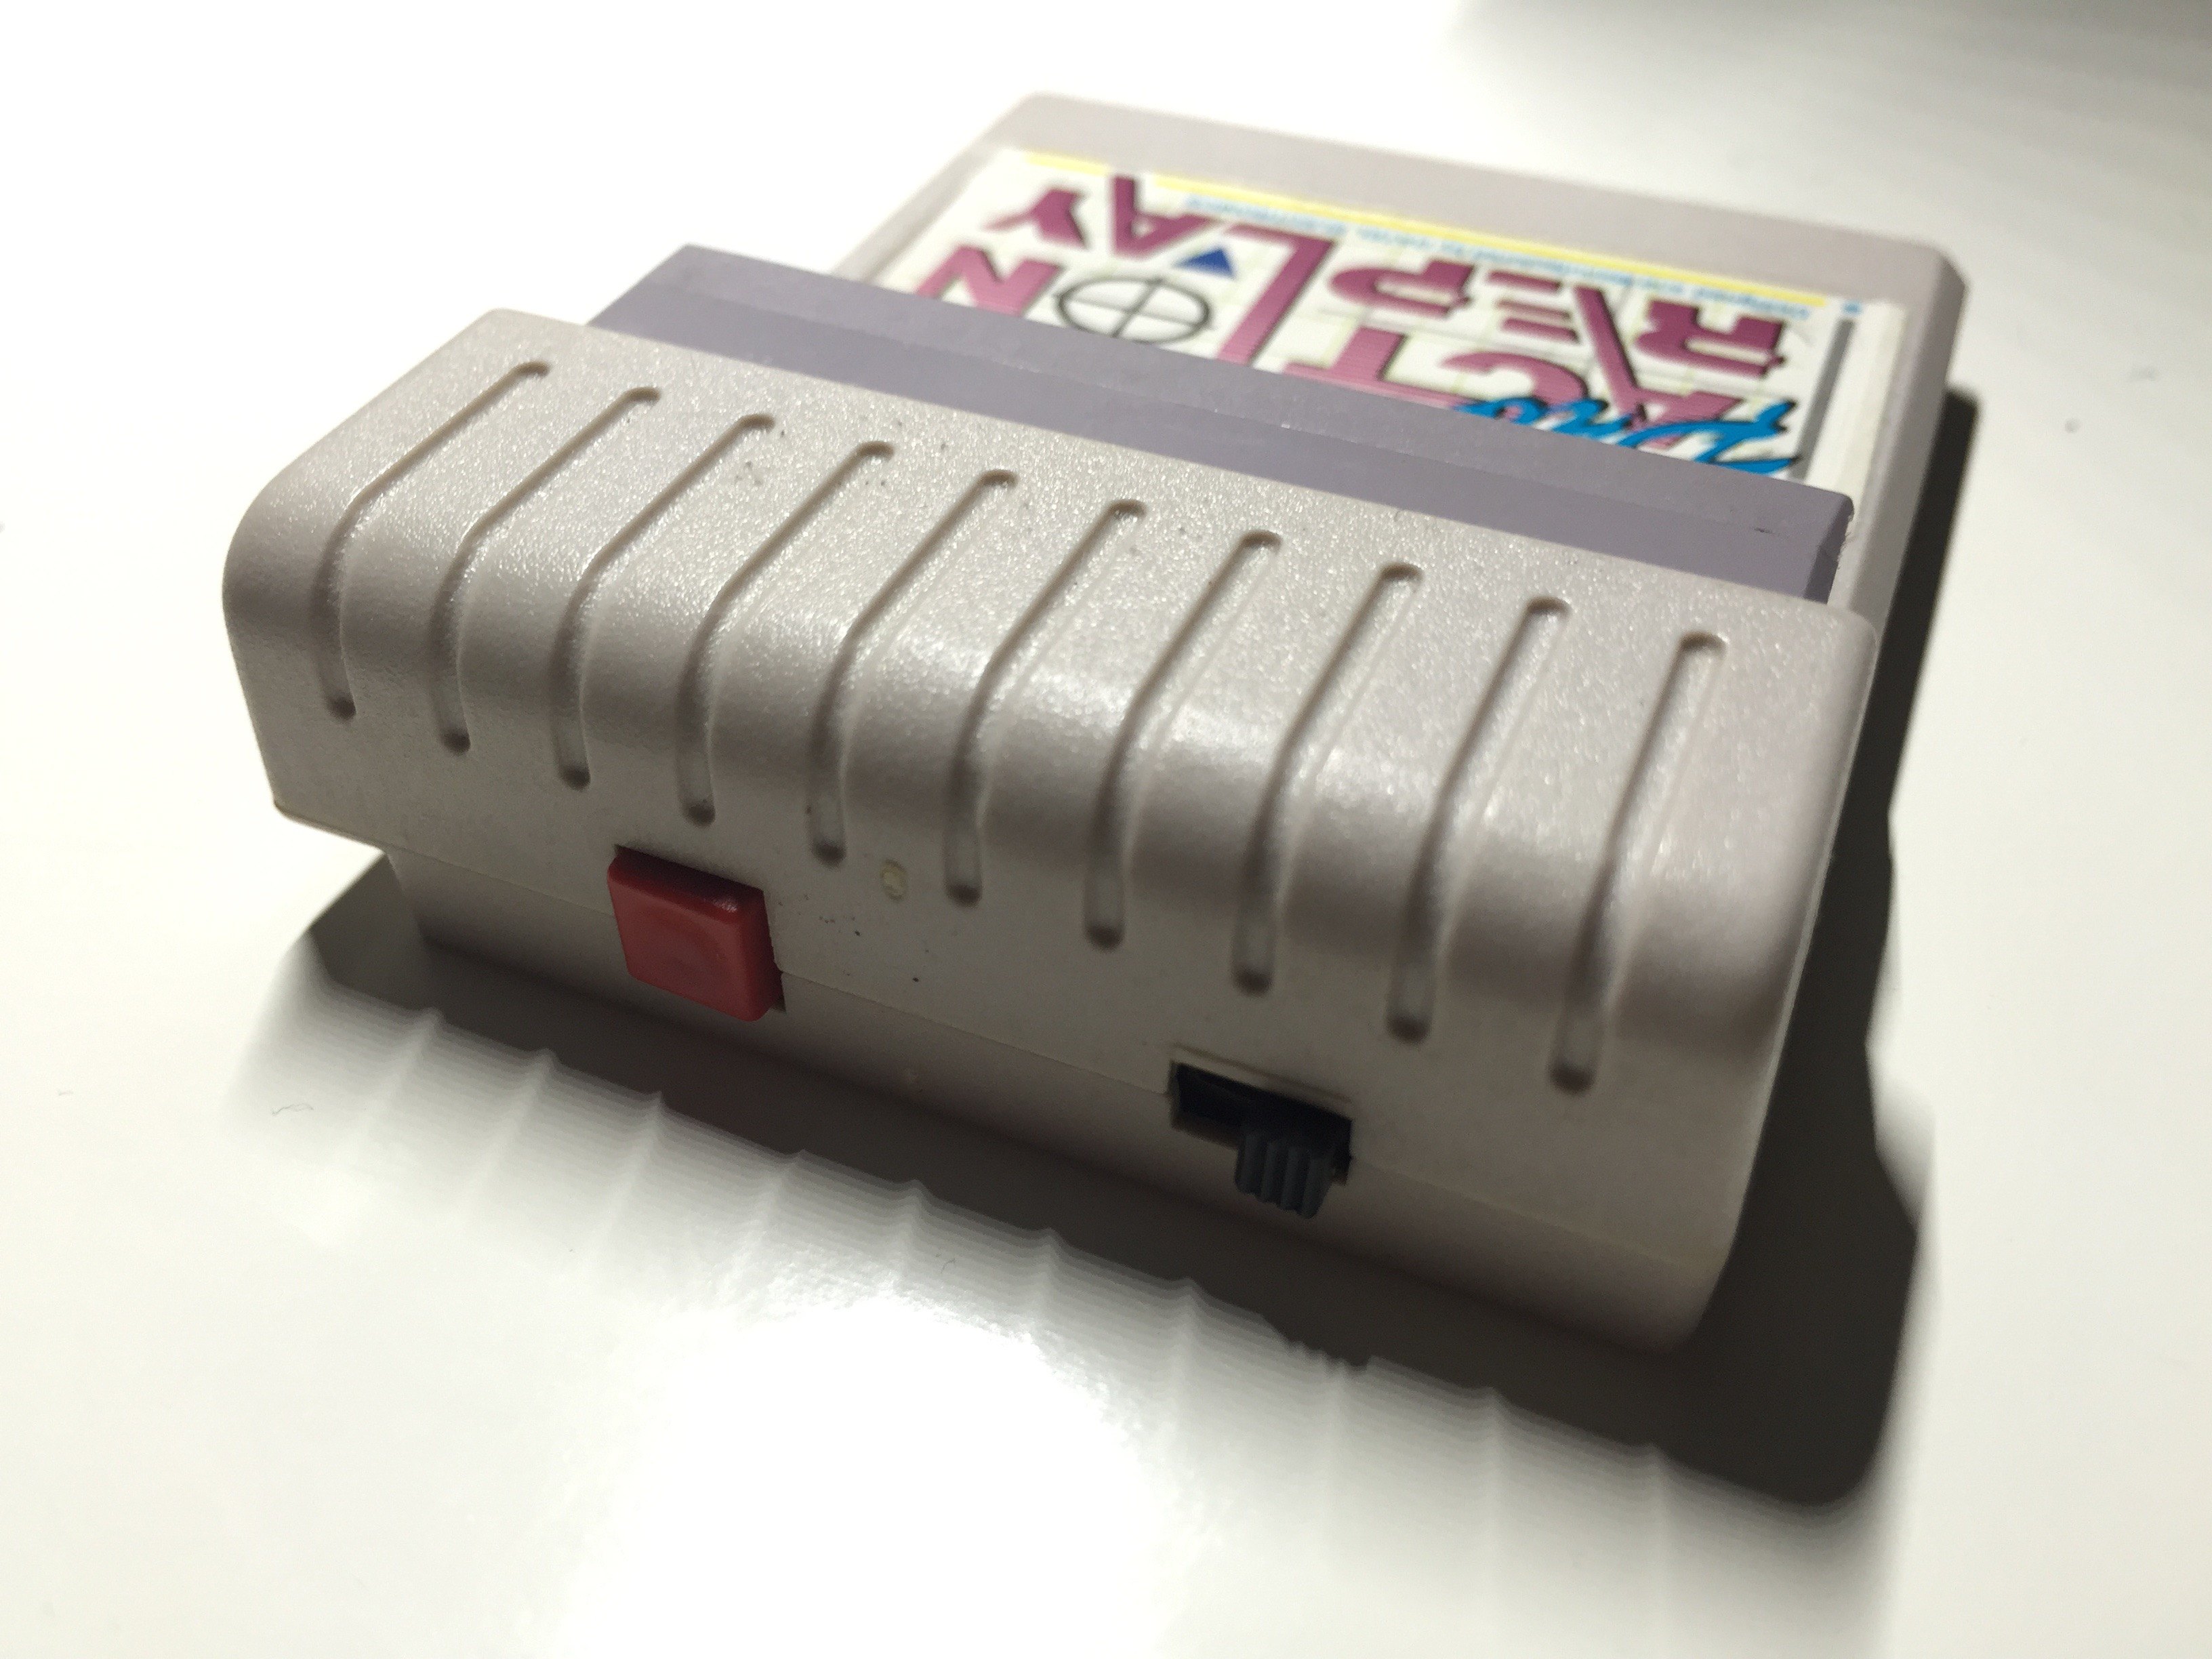 Help: Pro Action Replay for GameBoy | GBAtemp.net - The Independent Video  Game Community